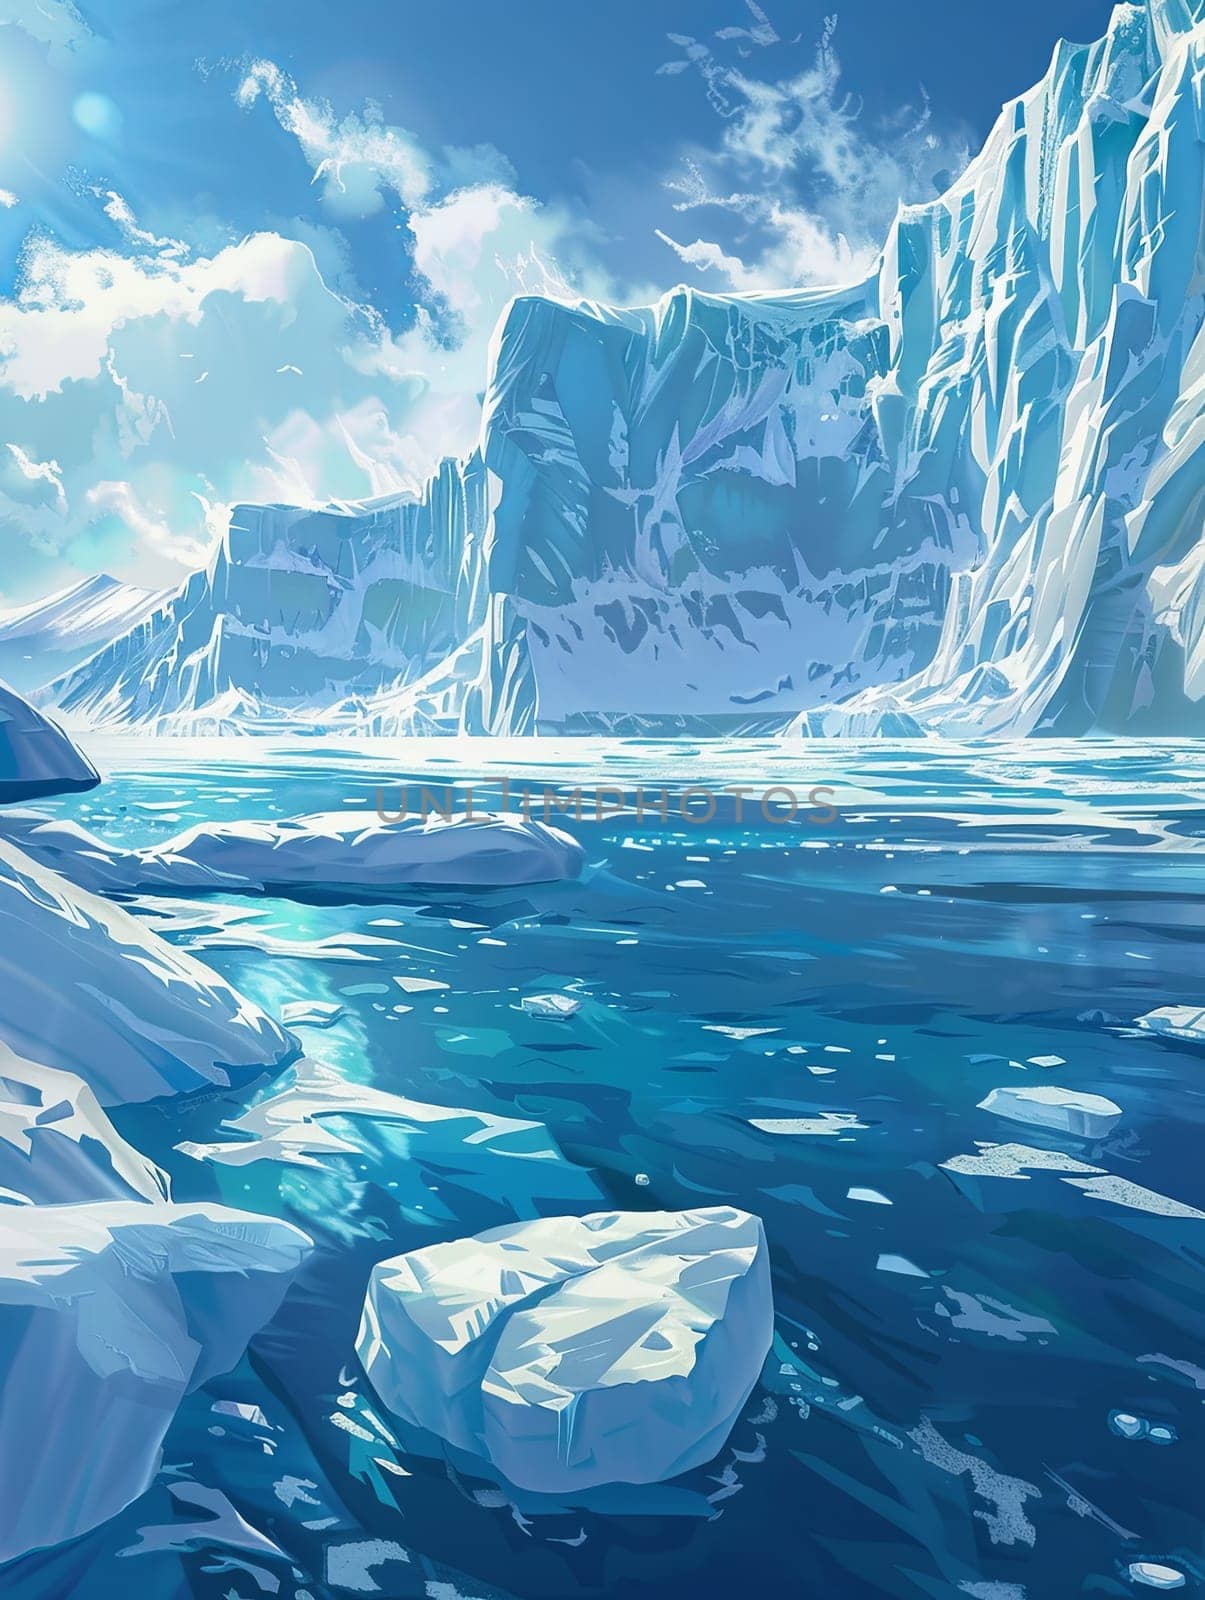 A painting depicting icebergs floating in the water, showcasing the cold beauty of the Arctic environment.